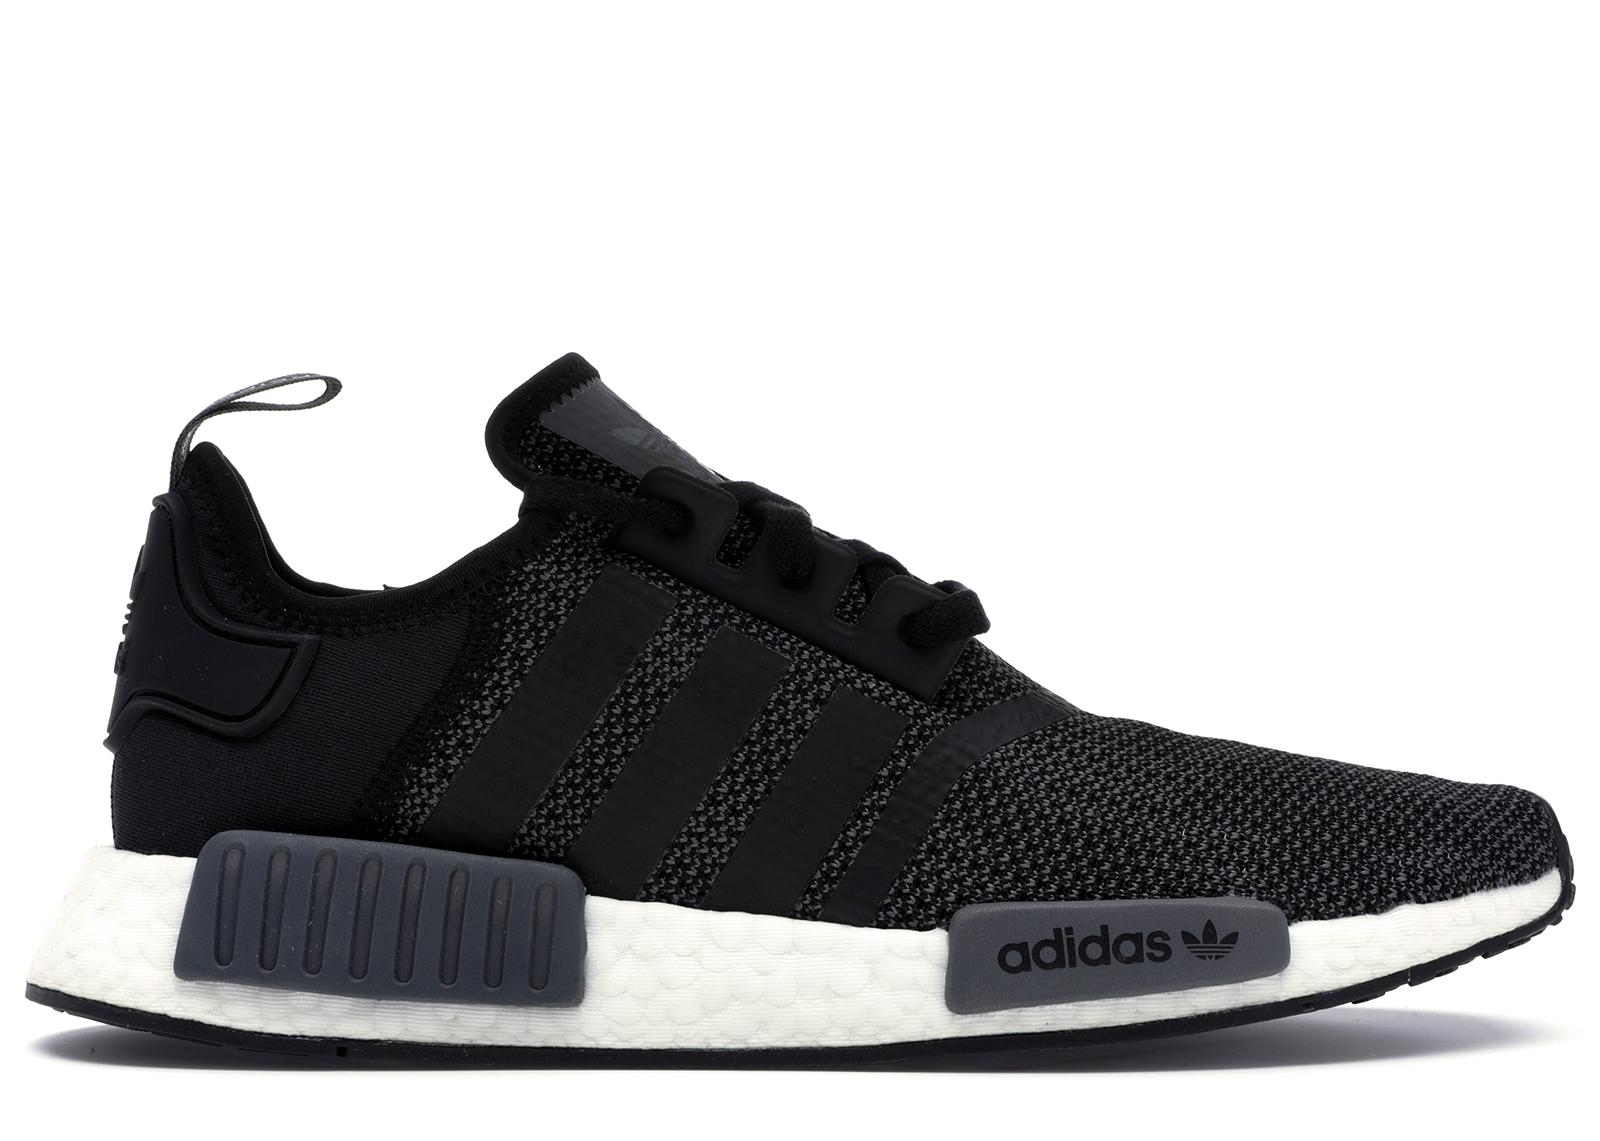 adidas Nmd R1 Core Black Carbon for Men - Lyst